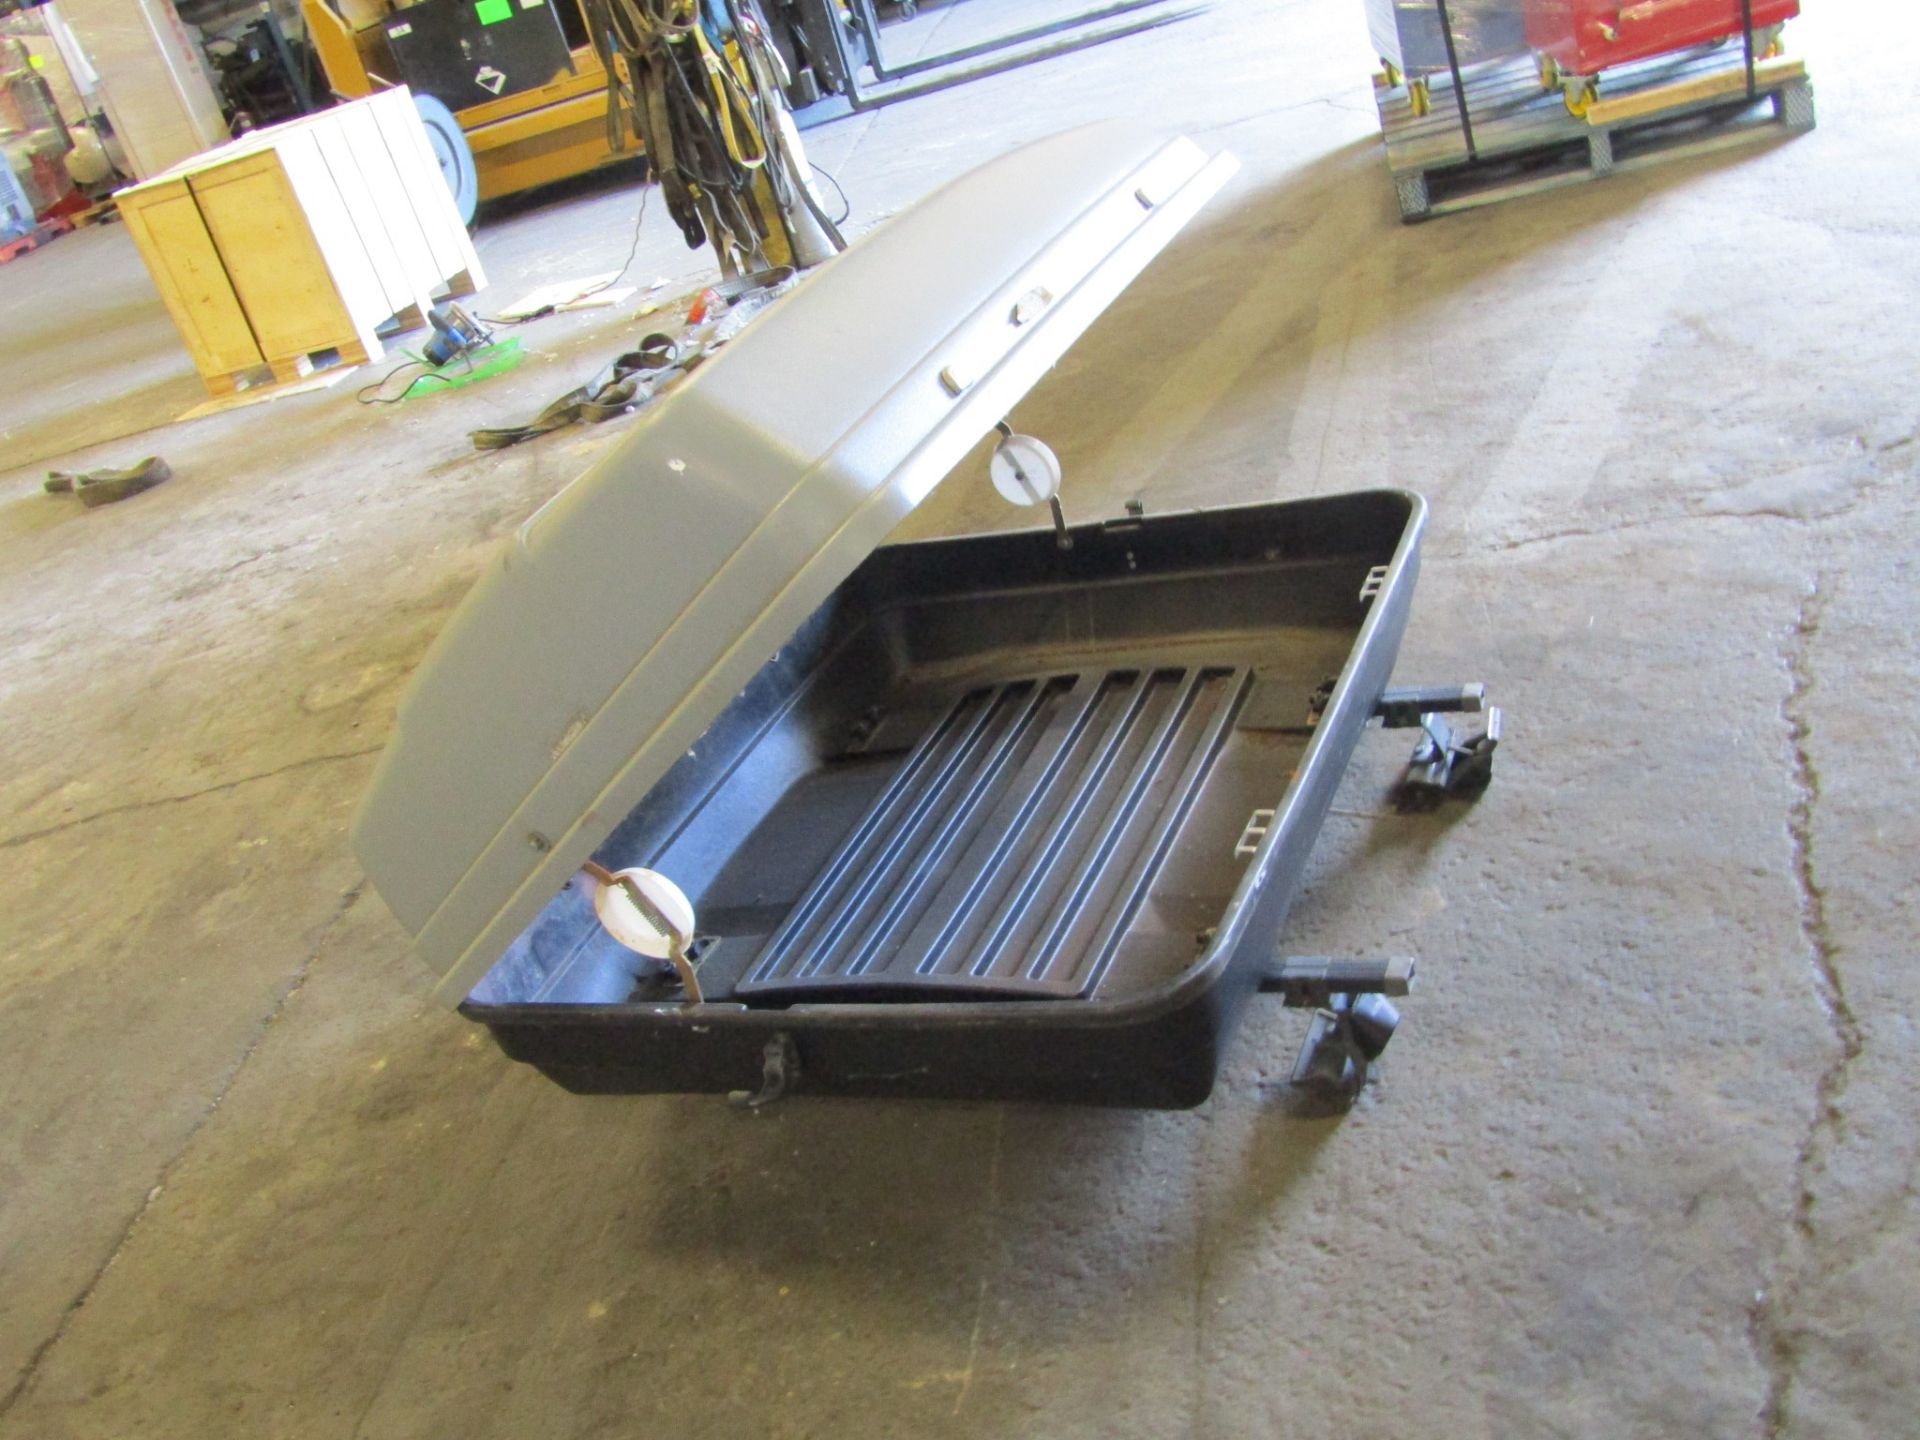 Roof Rack Car Carrier - extra luggage space on roof in enclosed case - Image 2 of 2